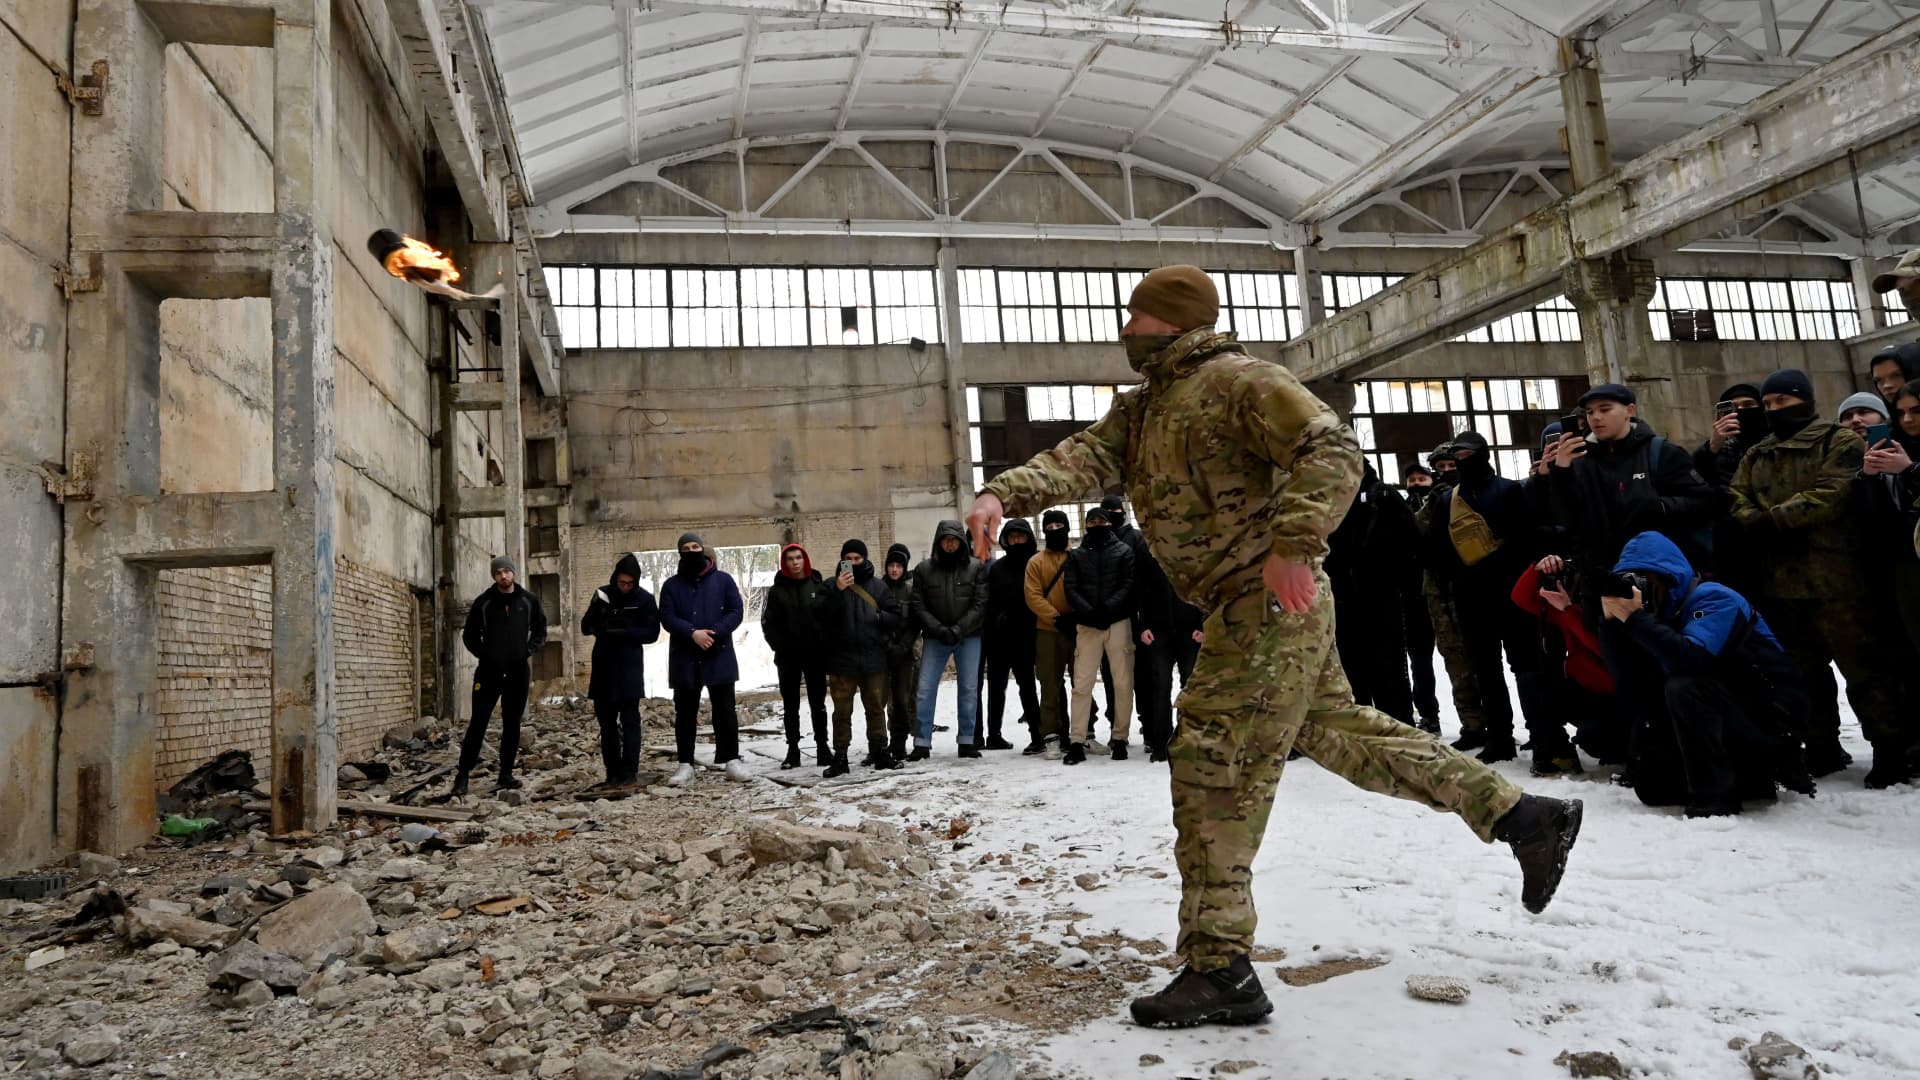 A military instructor teaches civilians to use Molotov cocktails during a training session at an abandoned factory in the Ukrainian capital of Kyiv on February 6, 2022.